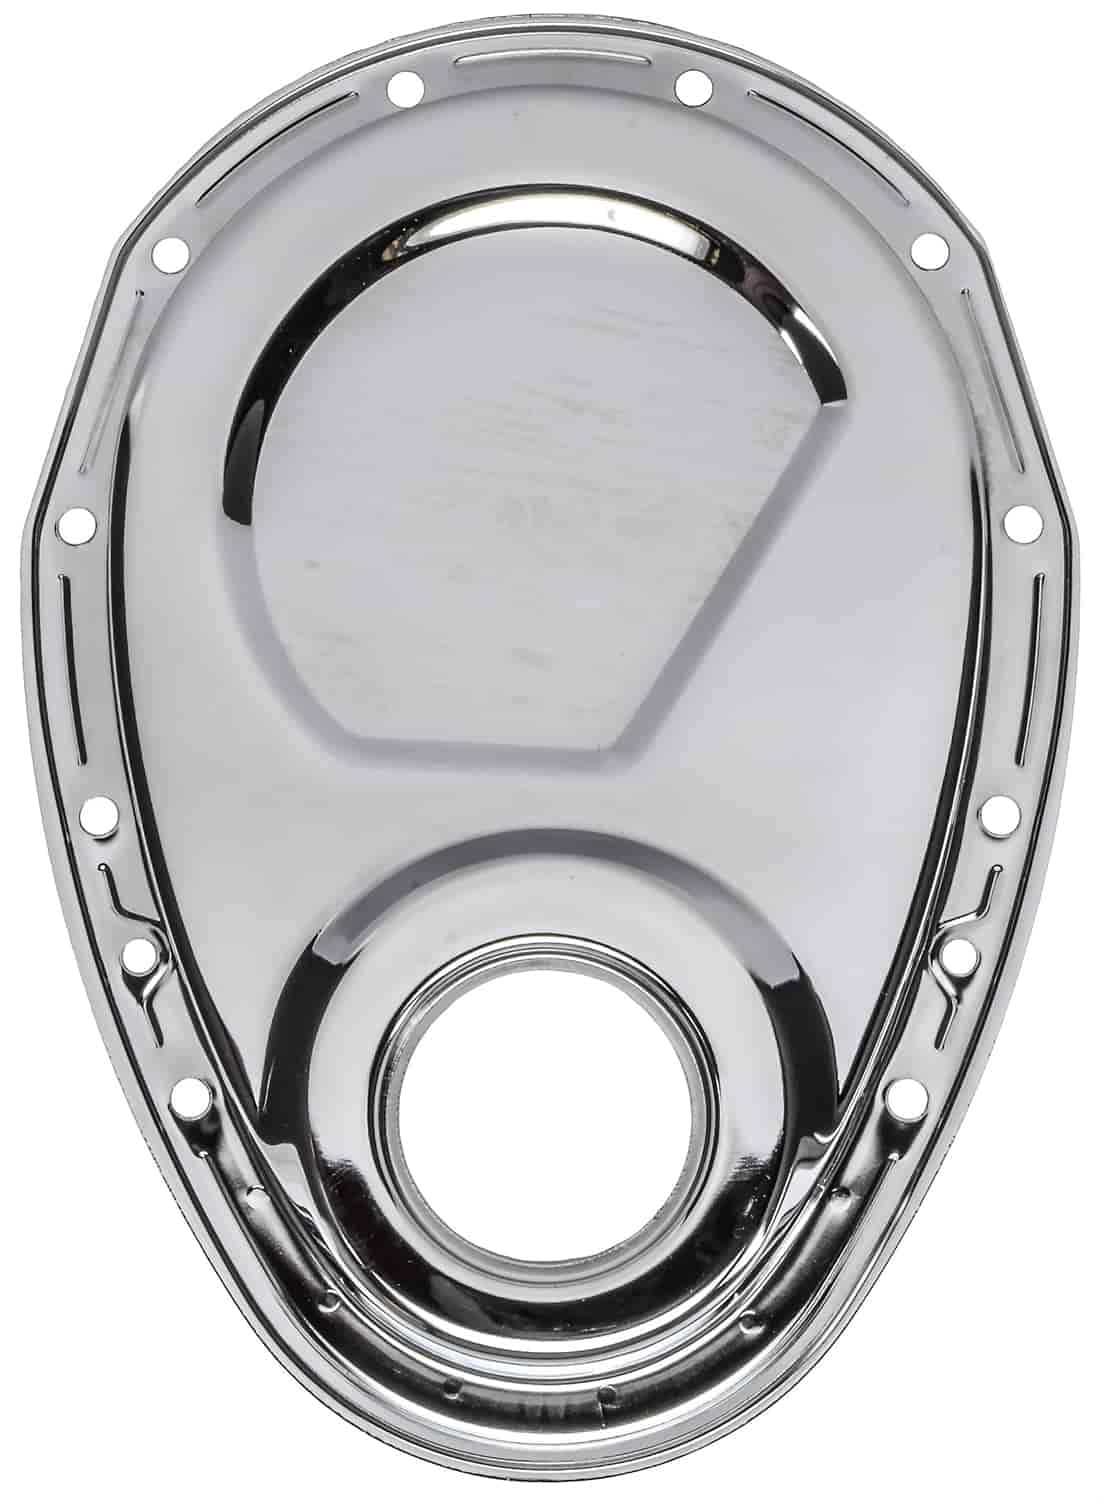 Timing Cover for 1955-1995 Small Block Chevy 283-400 [Chrome]